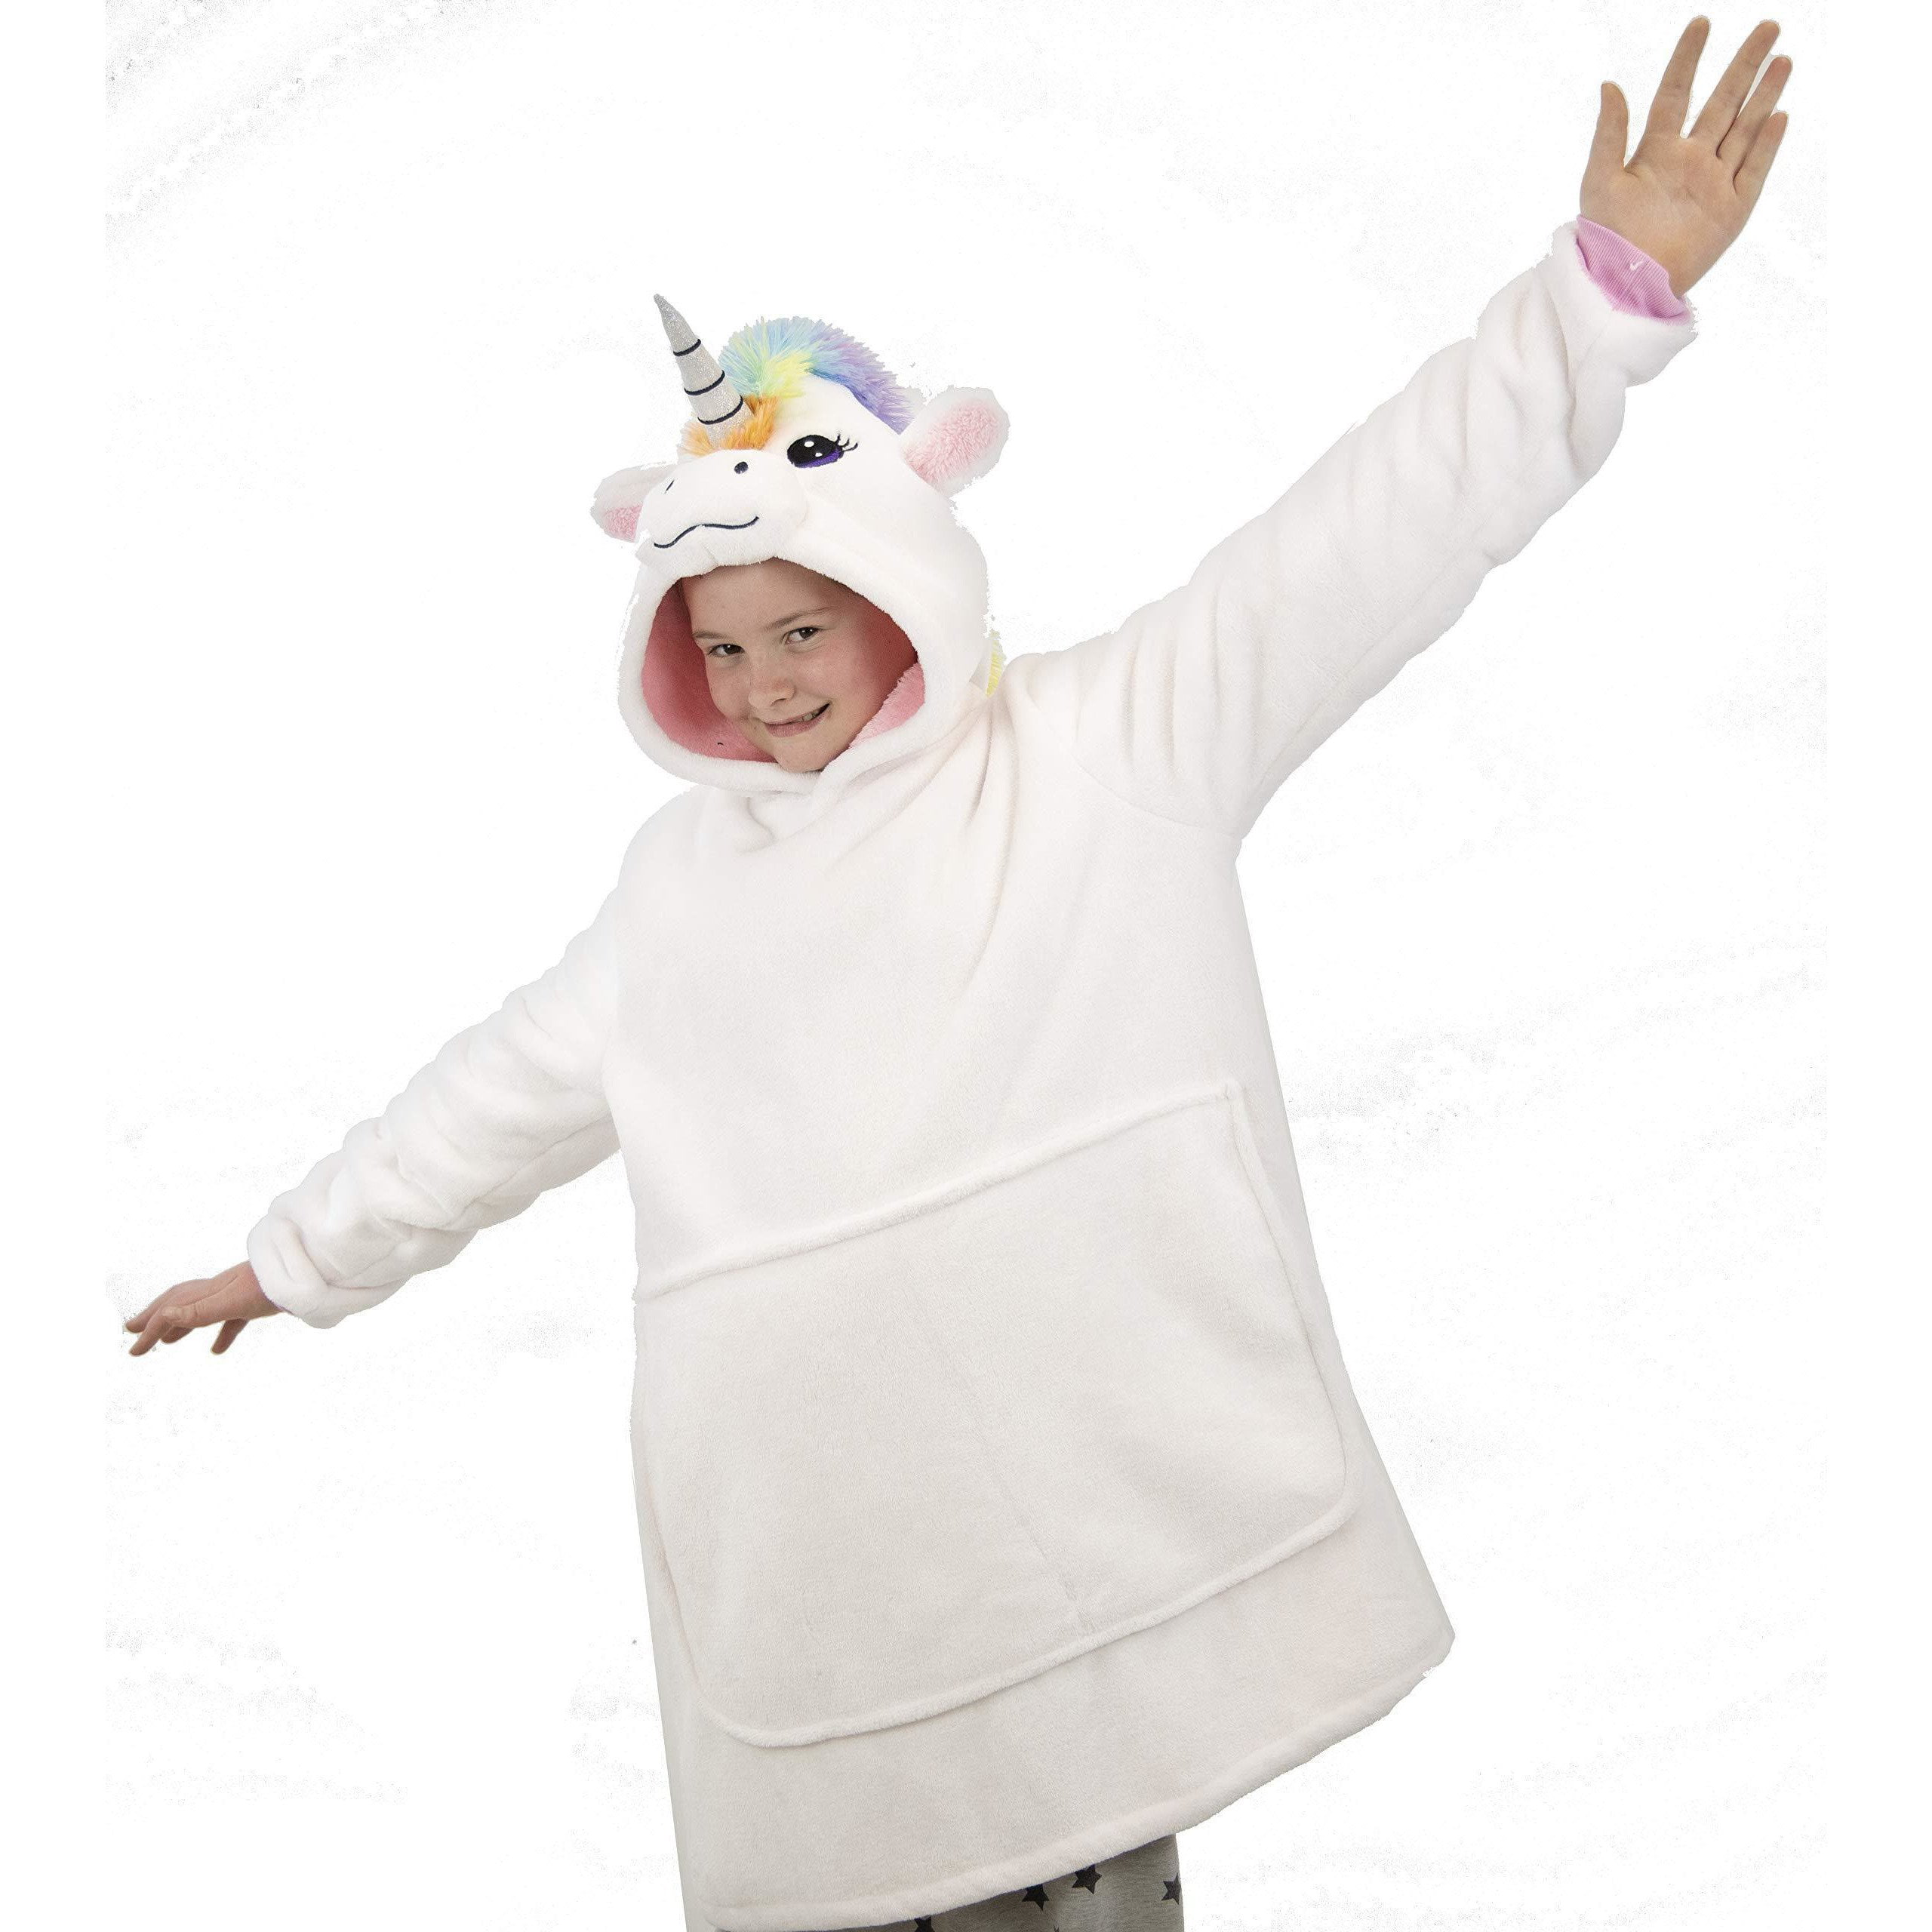 Blanket Sweatshirt For Adults & Children New Recommended